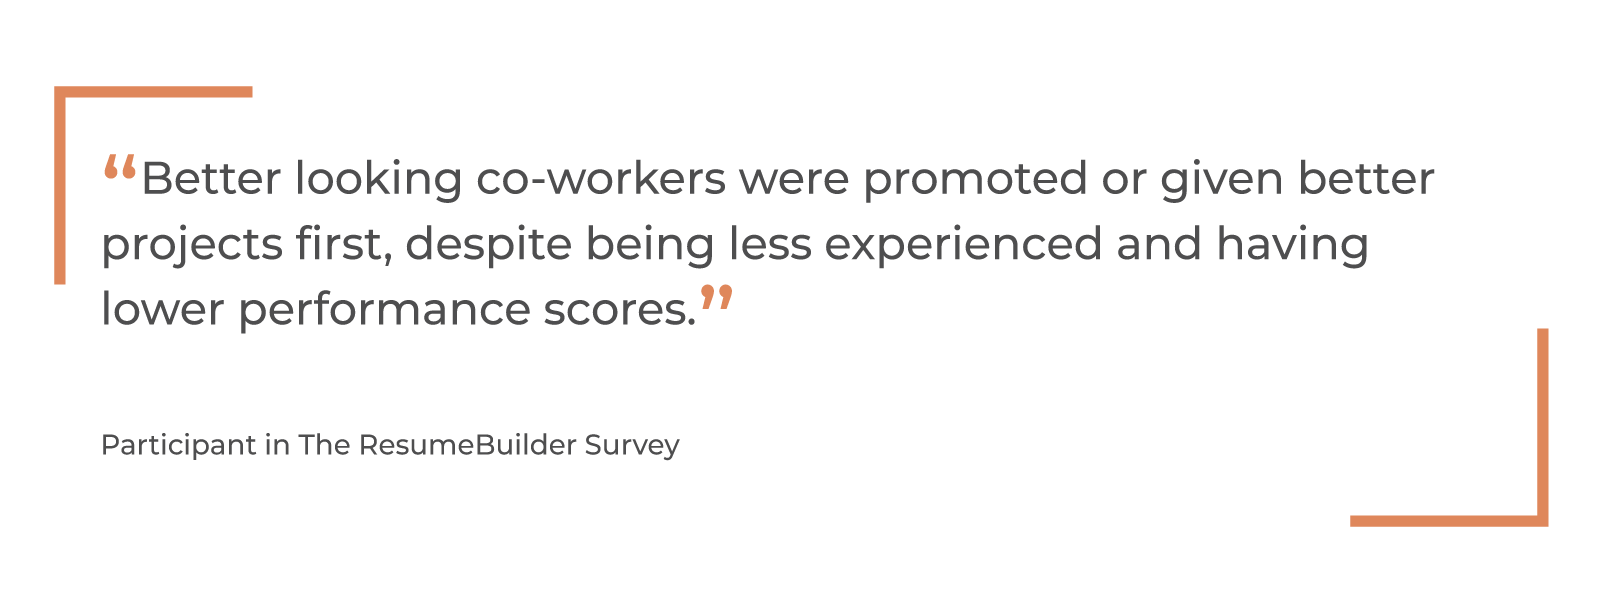 “Better looking co-workers were promoted or given better projects first, despite being less experienced and having lower performance scores.” Participant in The ResumeBuilder Survey